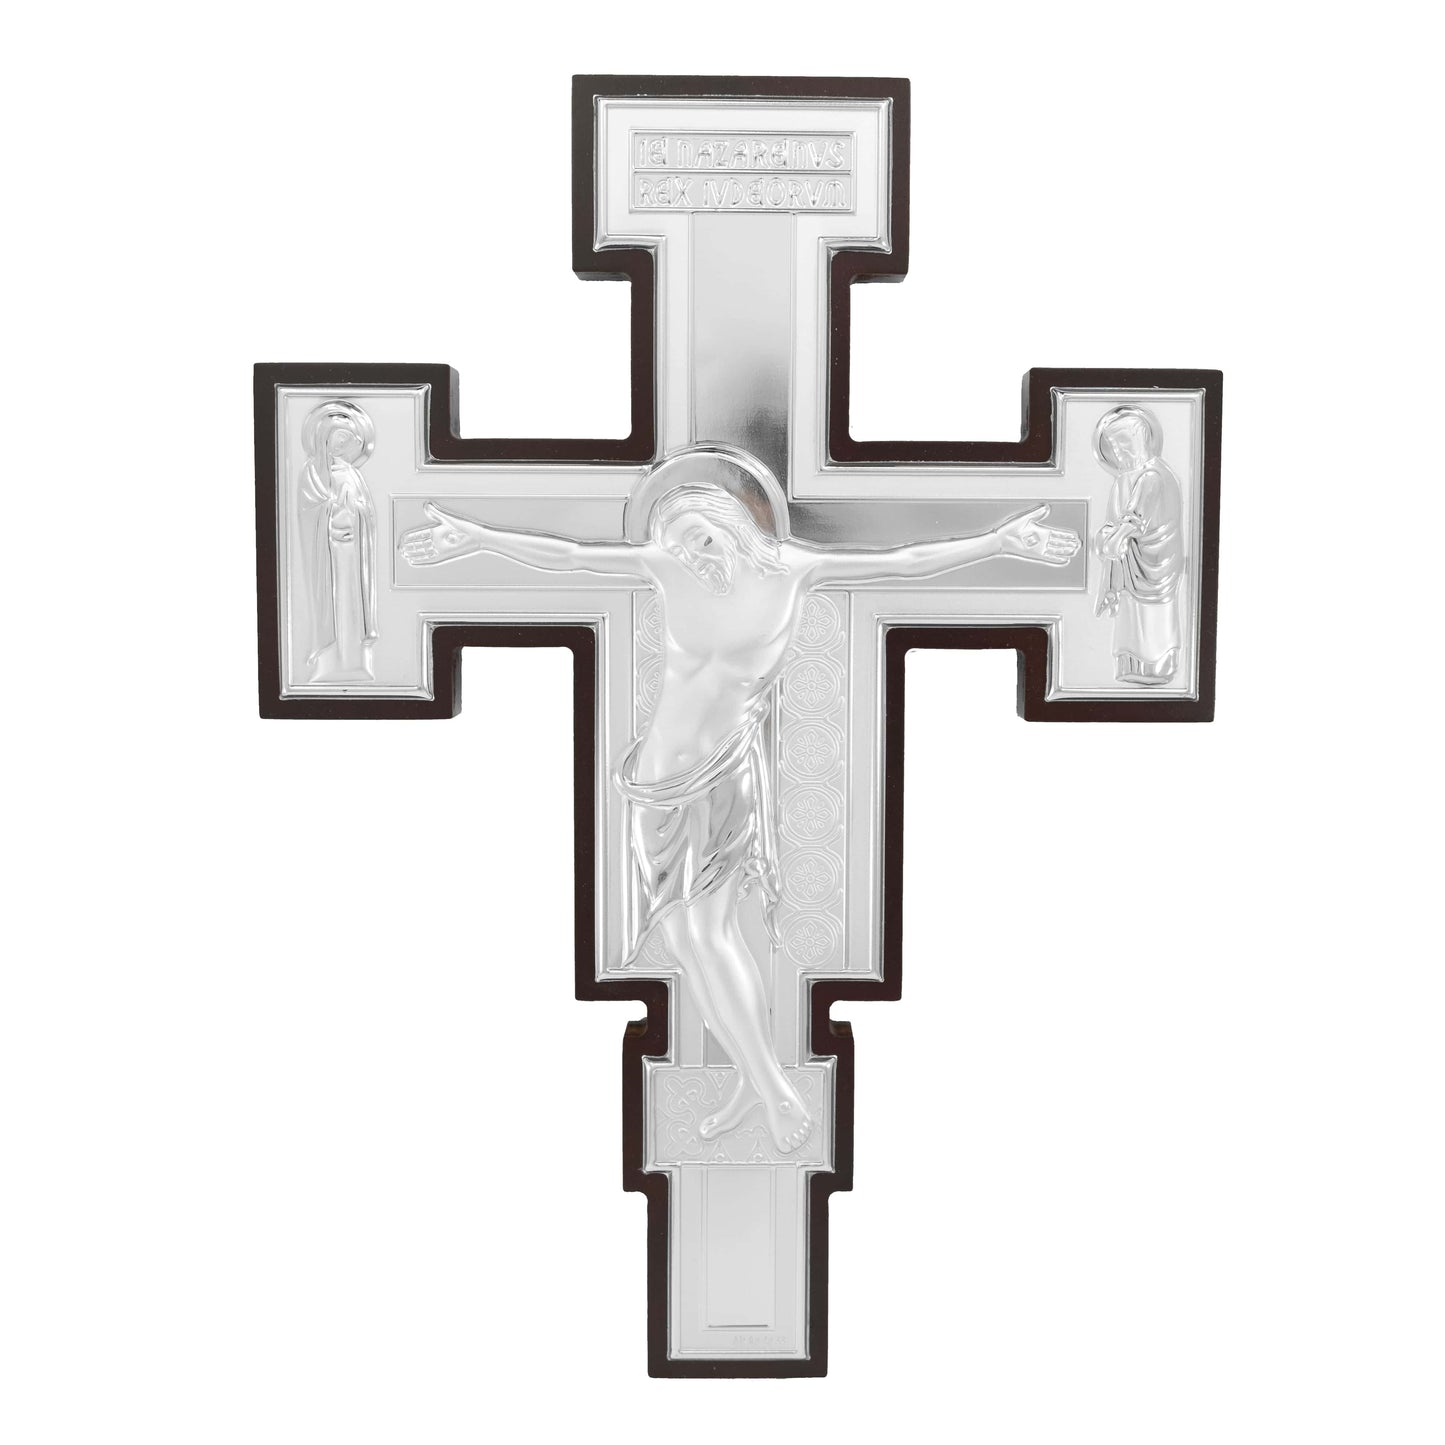 MONDO CATTOLICO 13 cm (5.12 in) Wooden Crucifix by Cimabue at Santa Croce With Silver Plaque